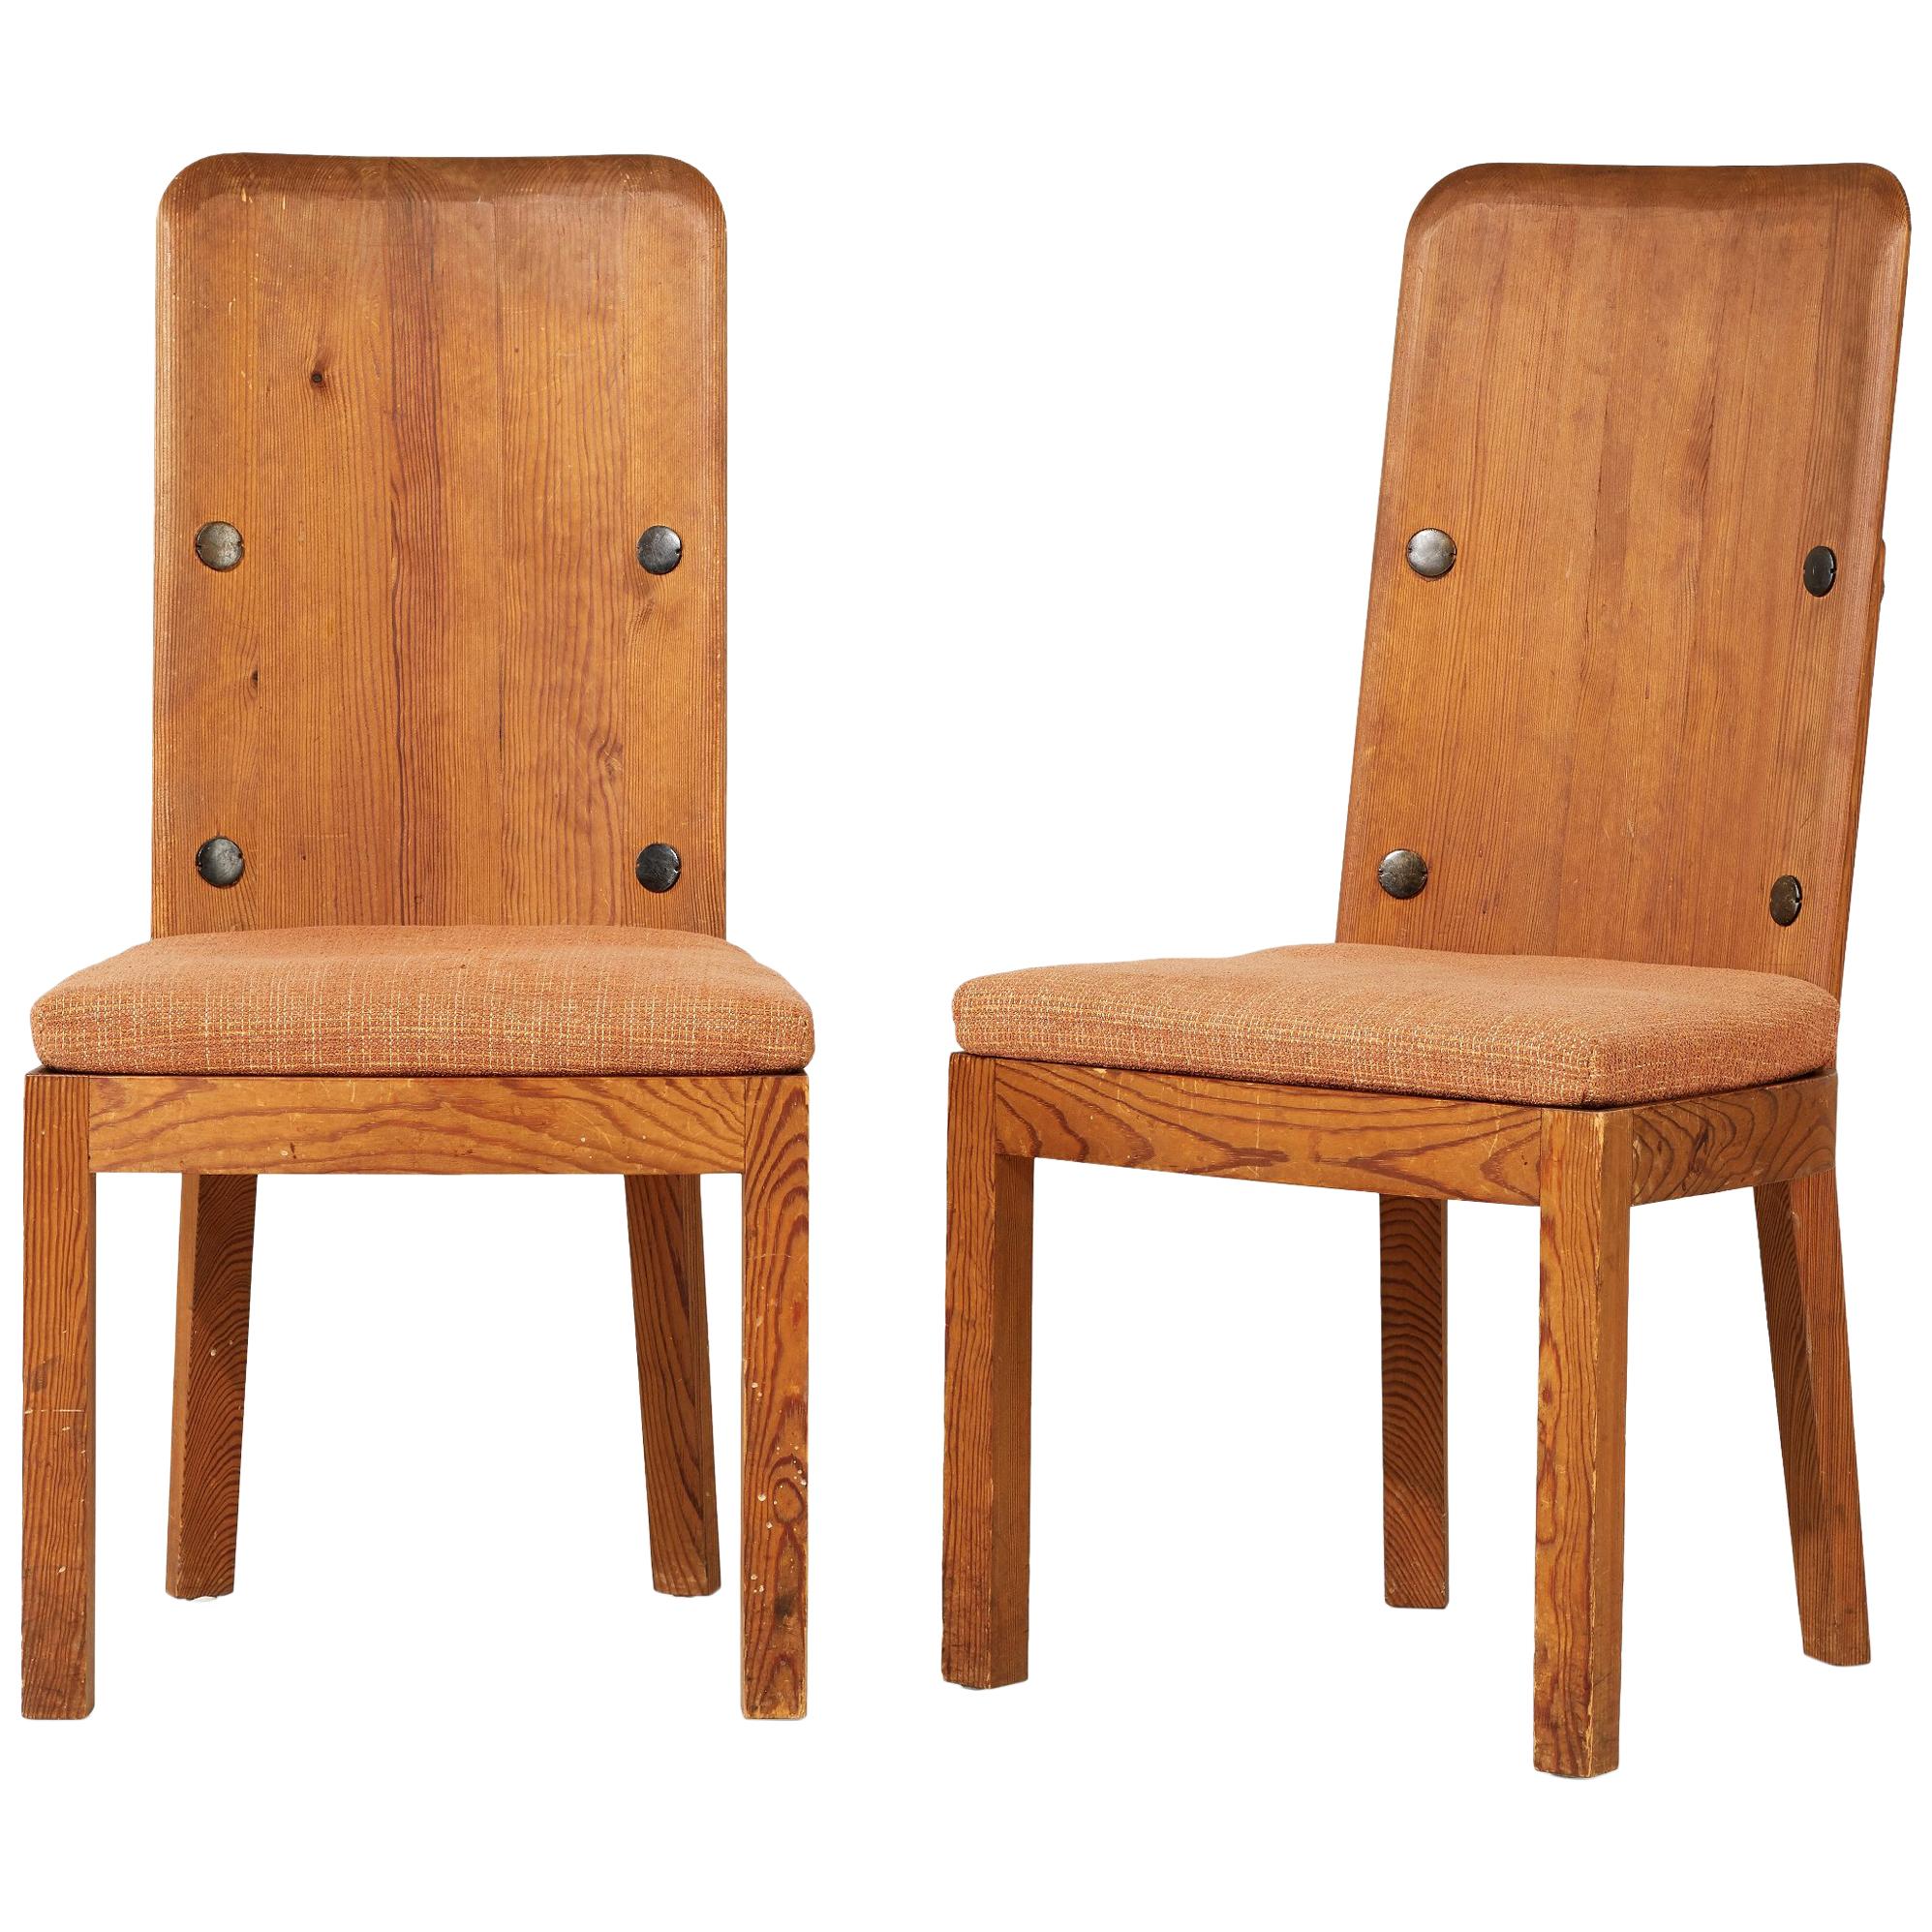 Axel Einar Hjorth, pair of Lovo Chairs, Sweden, 1930s For Sale